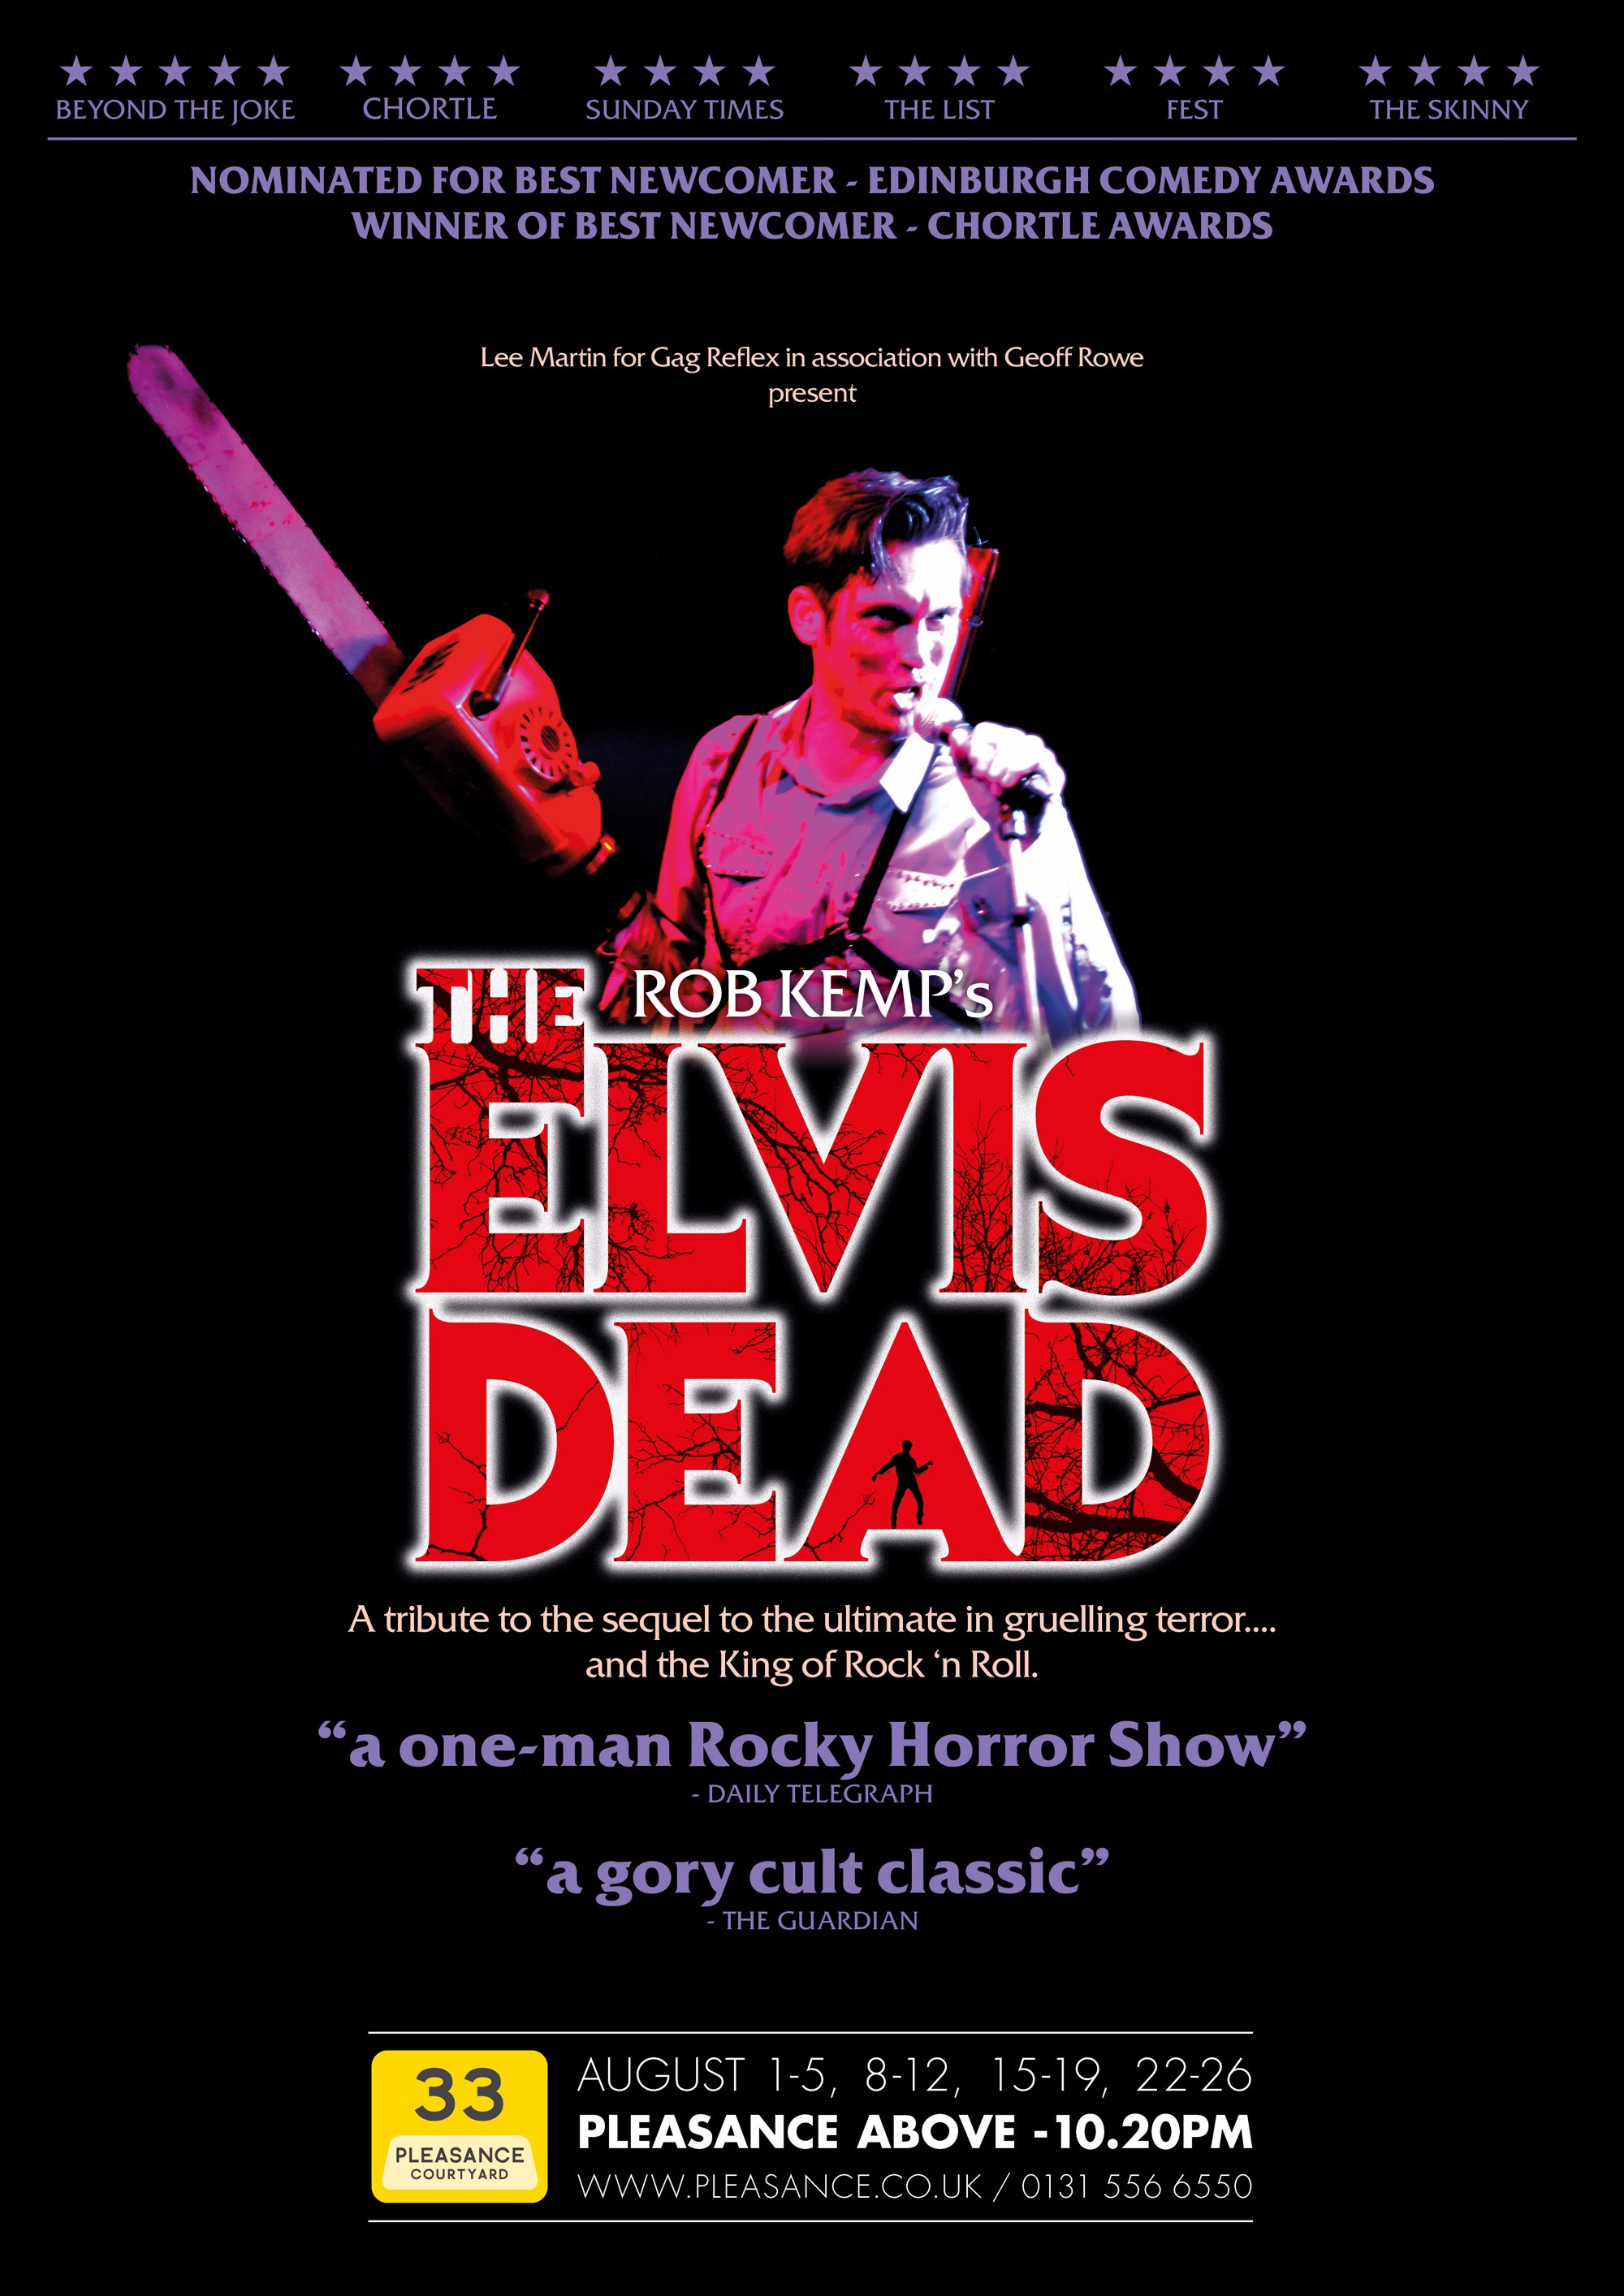 The poster for Rob Kemp: The Elvis Dead